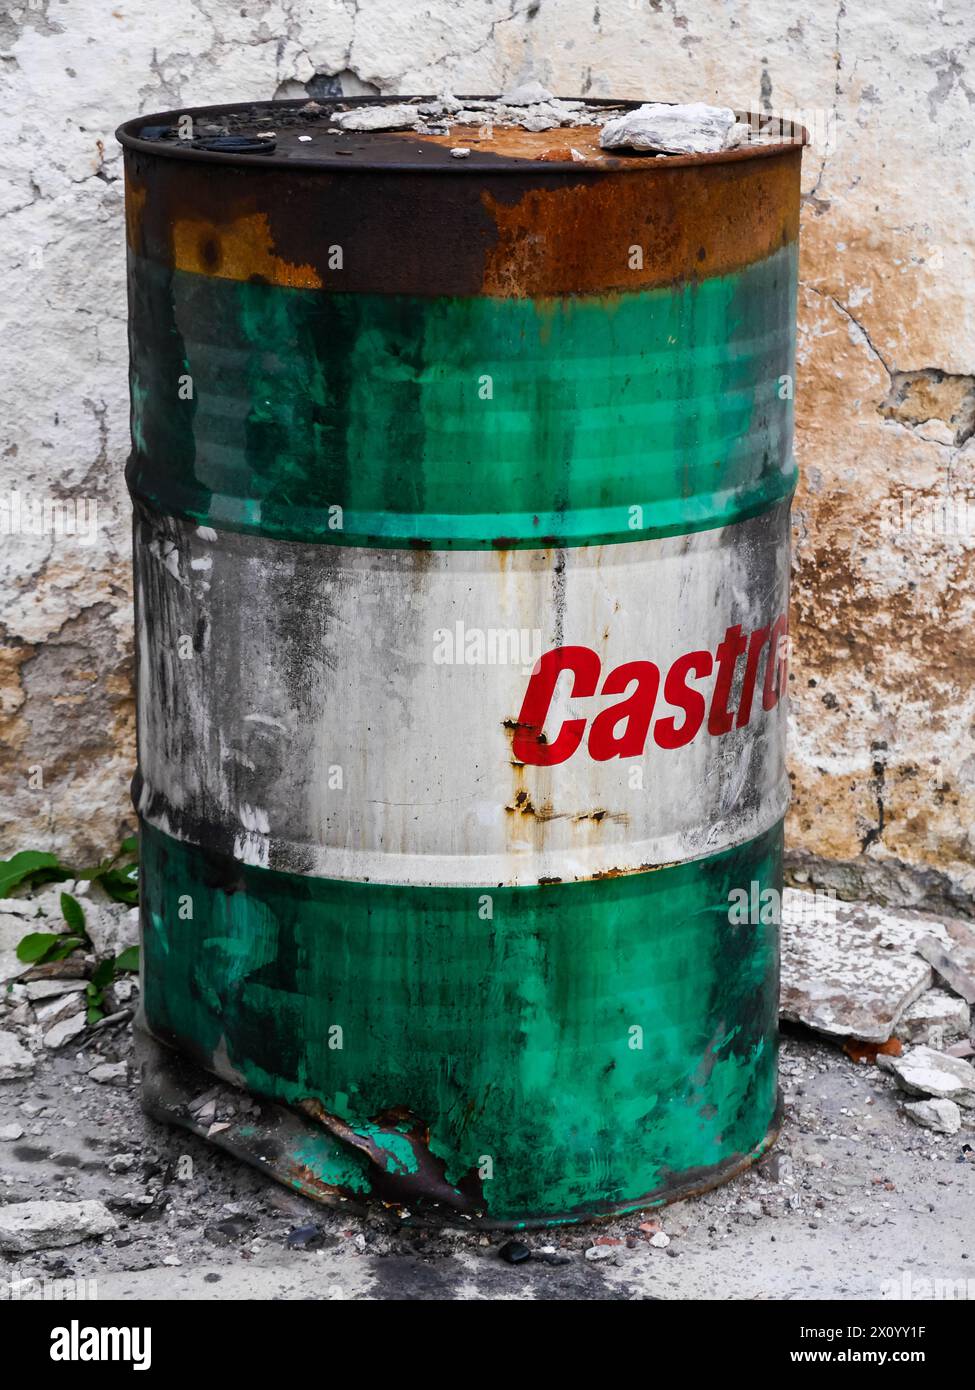 Green and white oil barrel with red Castrol logo on white background, standing against a stone wall. Discoloured and tarnished by possible fire. Stock Photo